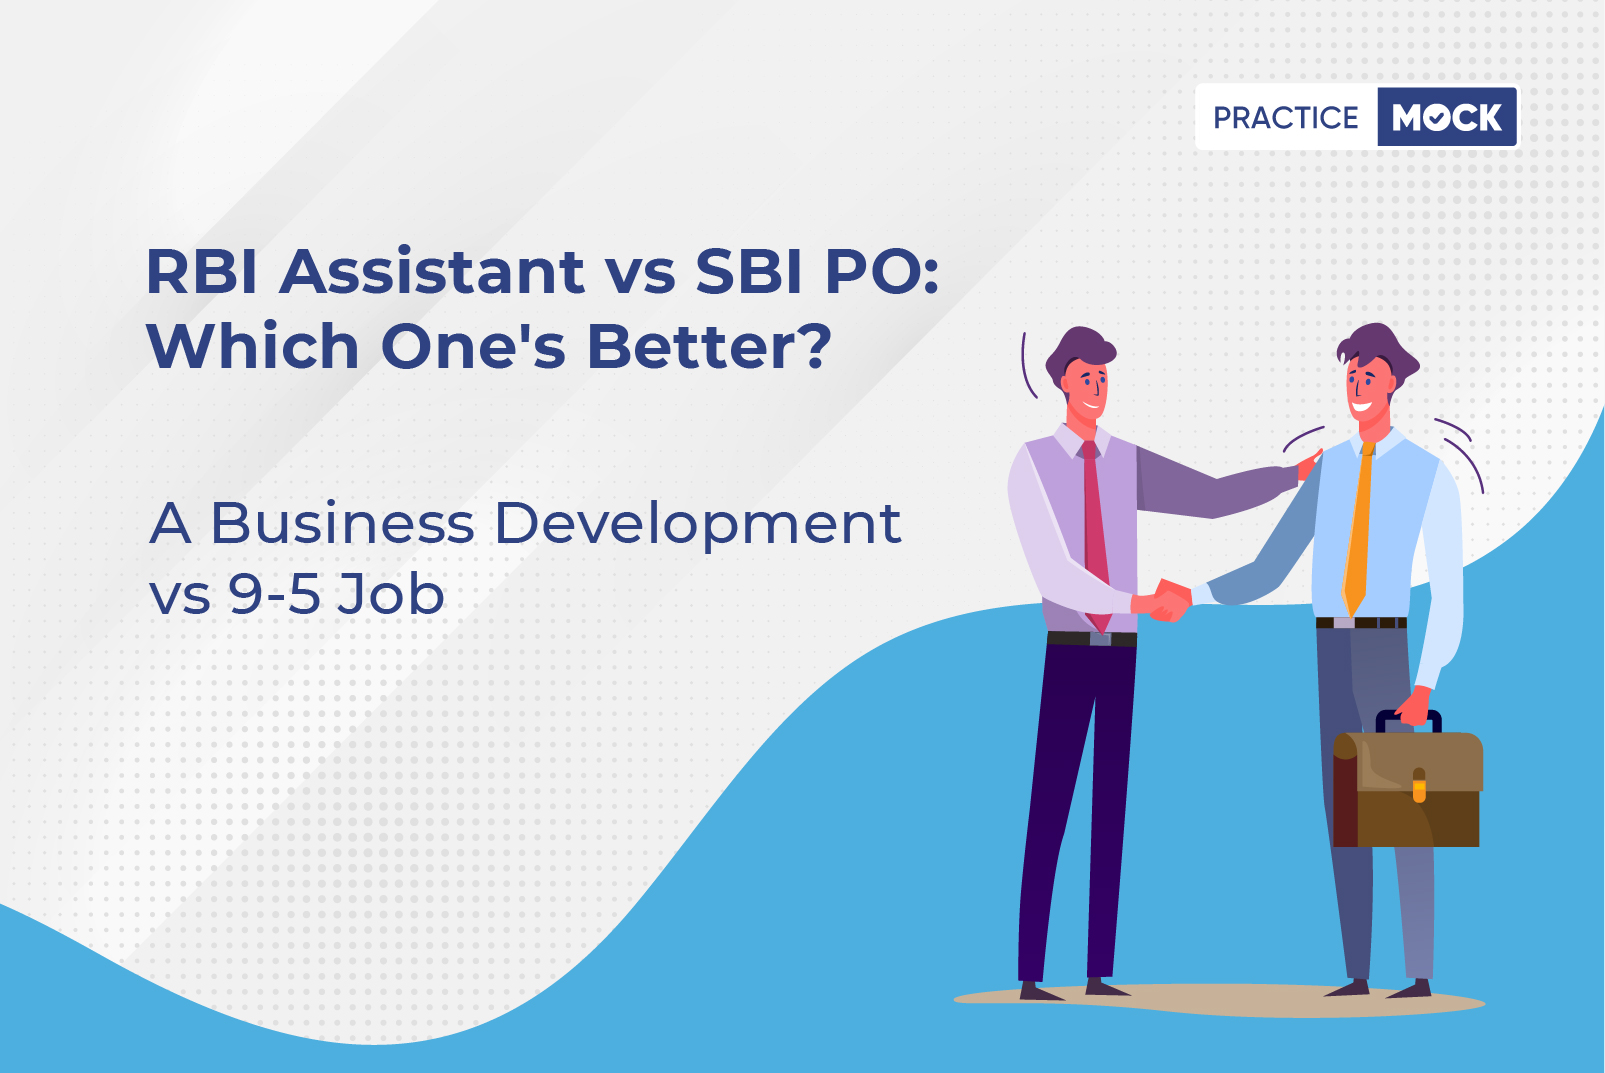 RBI Assistant vs SBI PO Which one's better?